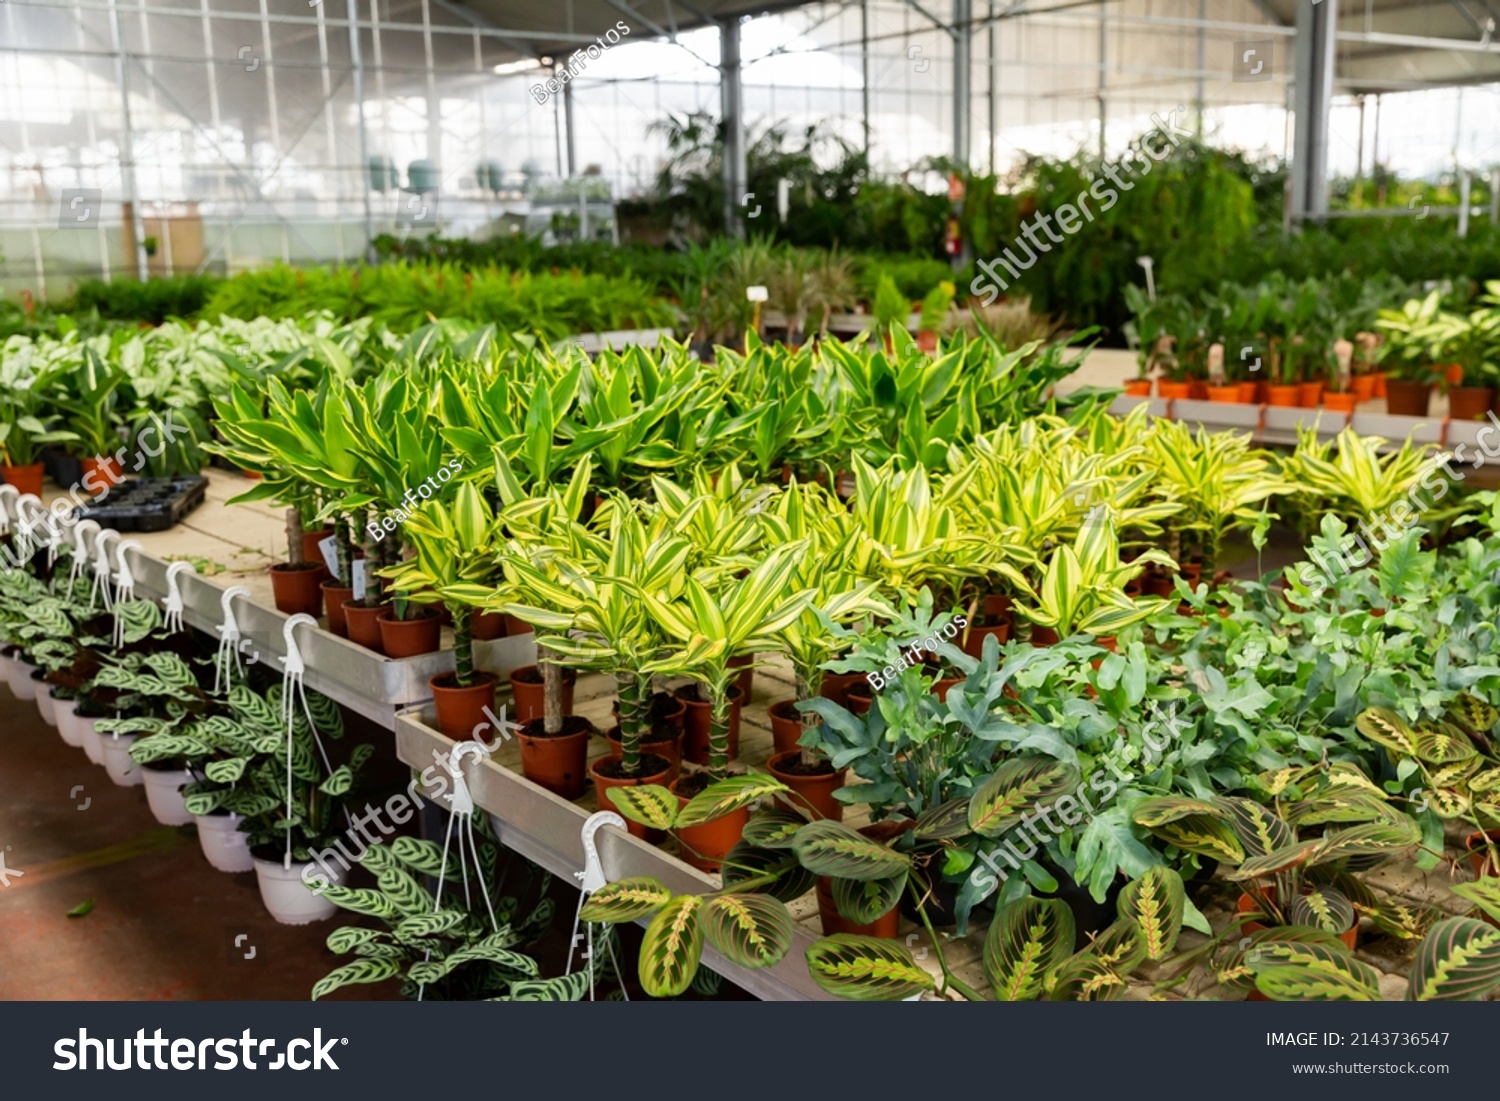 Pots with planted dracaena with variegated foliage on showcase of garden center. Concept of growing of ornamental potted plants for home design #2143736547